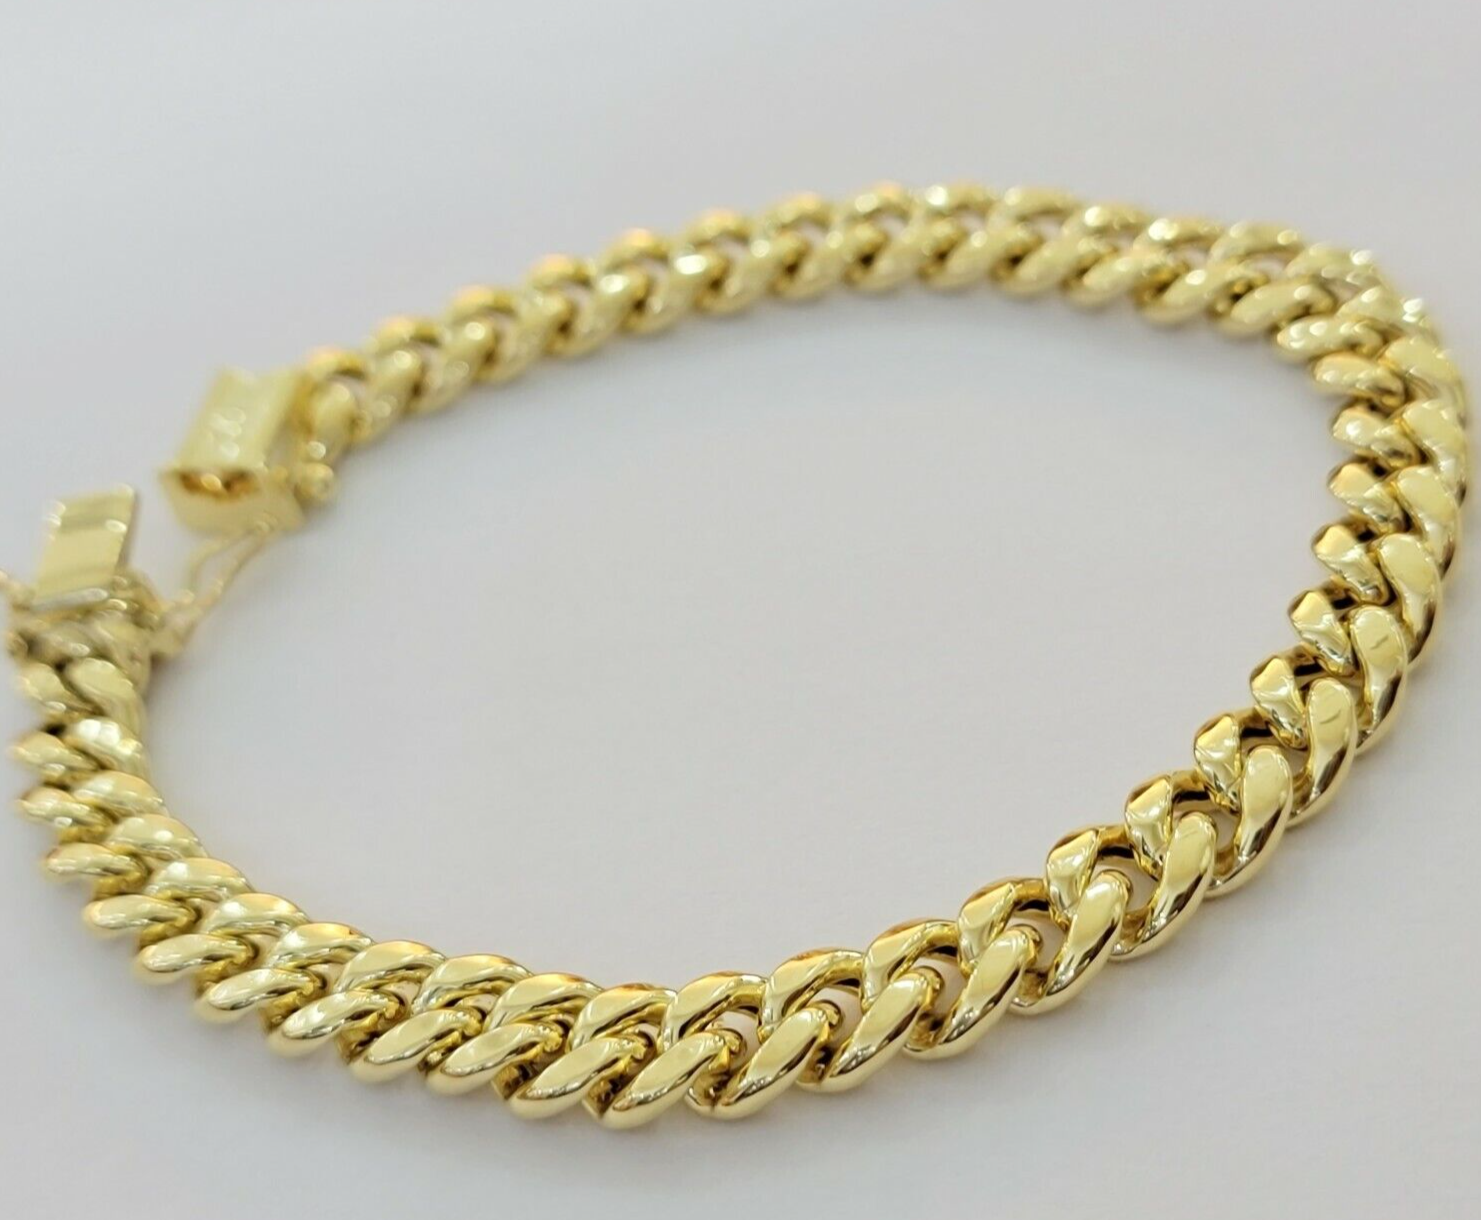 Mens Real 14k Gold Bracelet 8mm 7.5 inch Miami Cuban Link Box Clasp Strong 14 KT